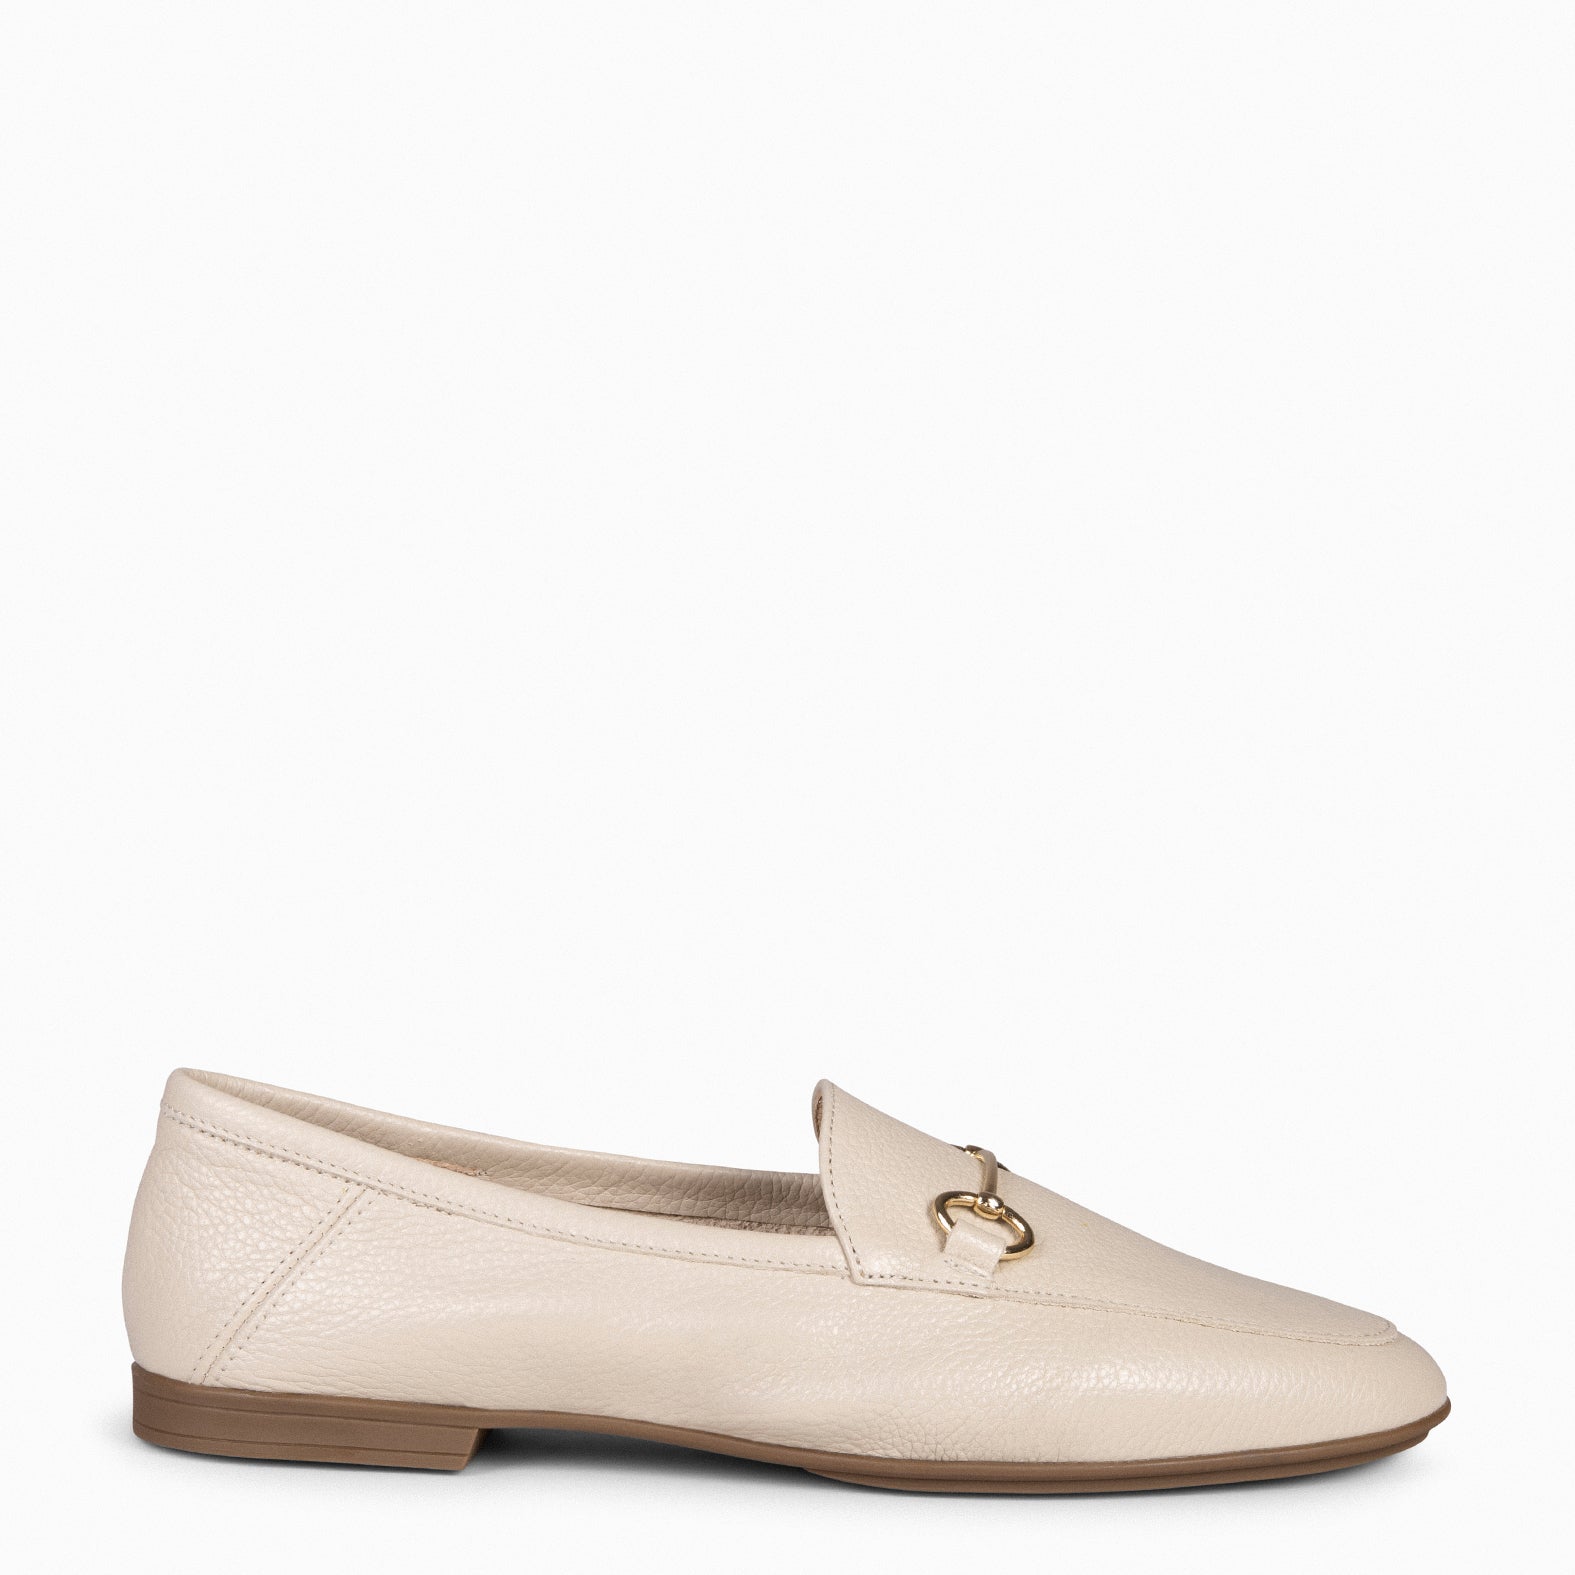 STYLE – BEIGE moccasins with horsebit